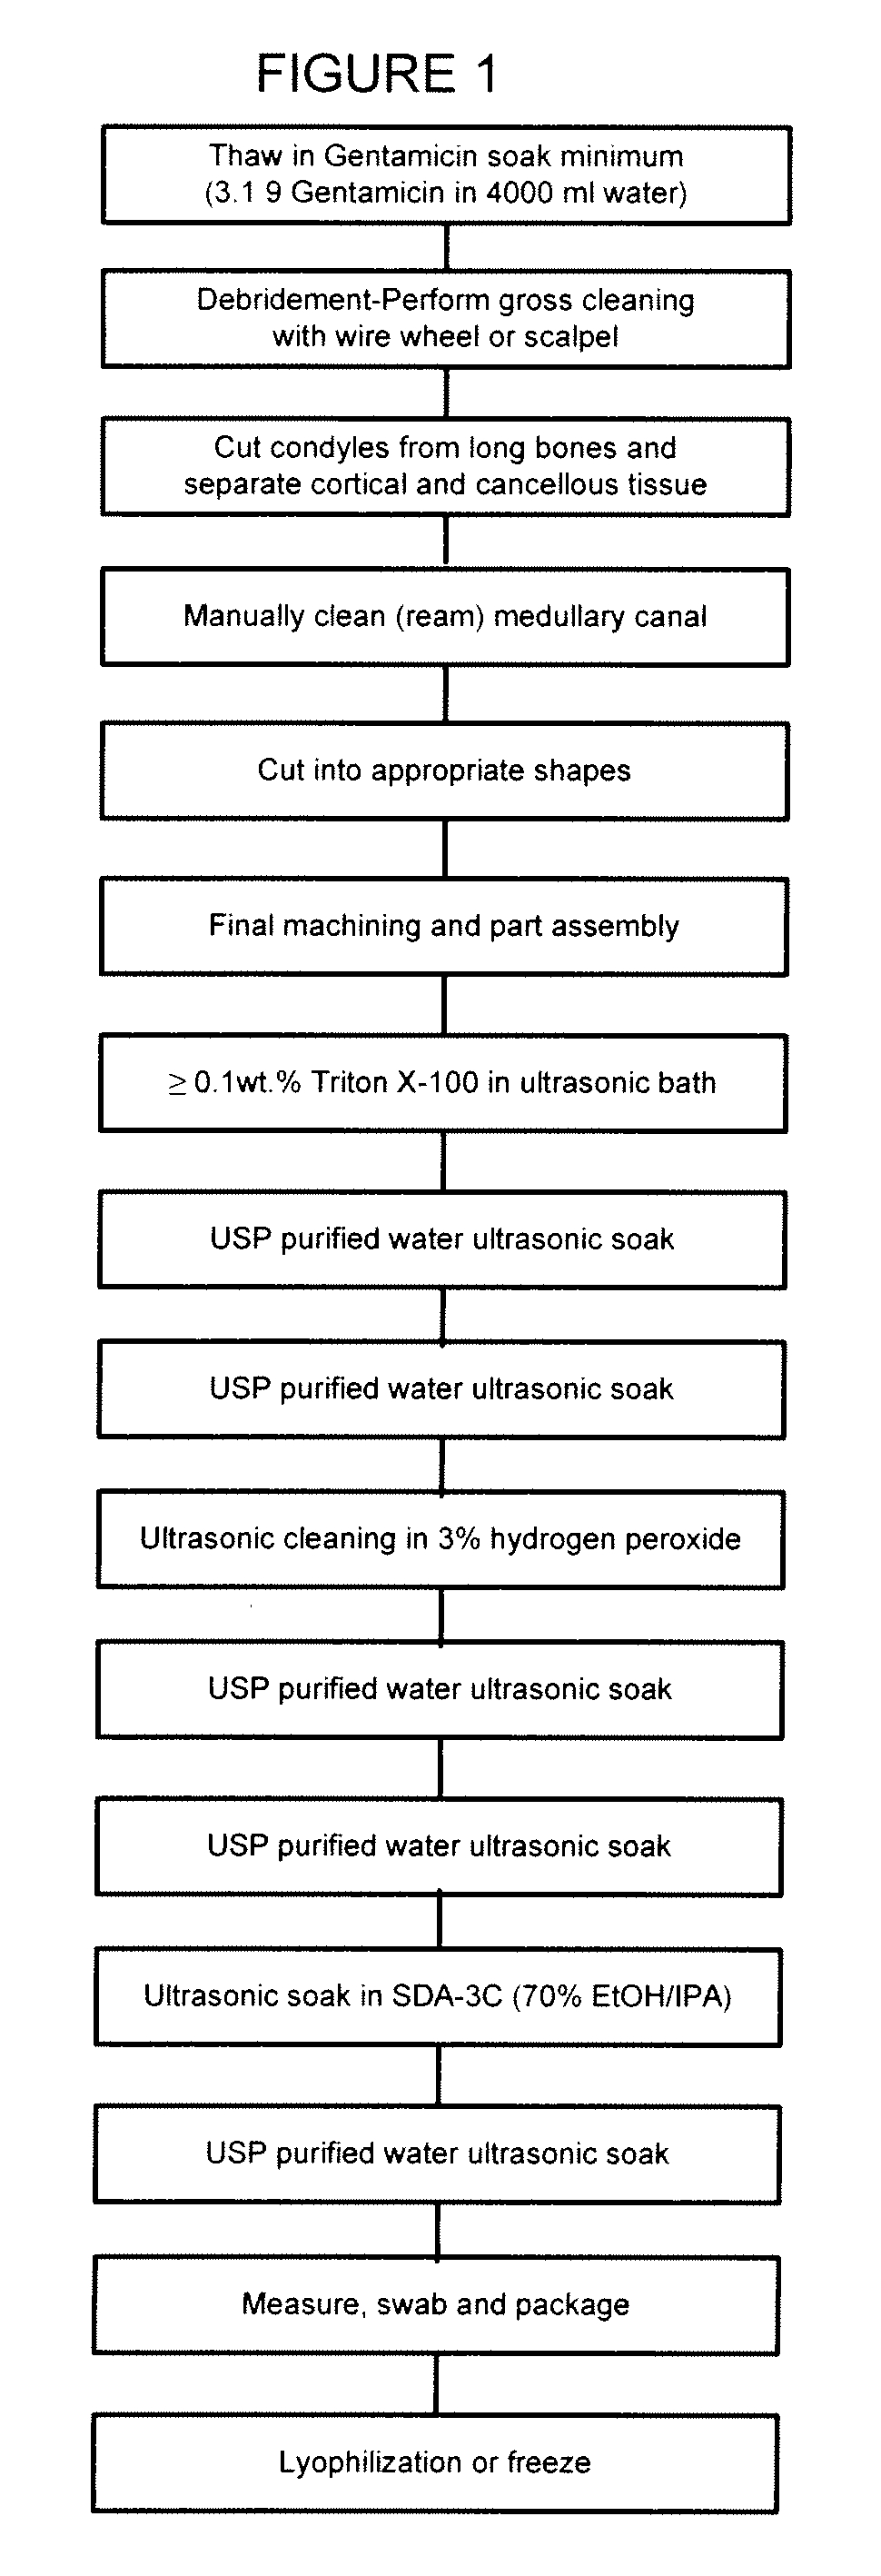 Allograft tissue purification process for cleaning bone